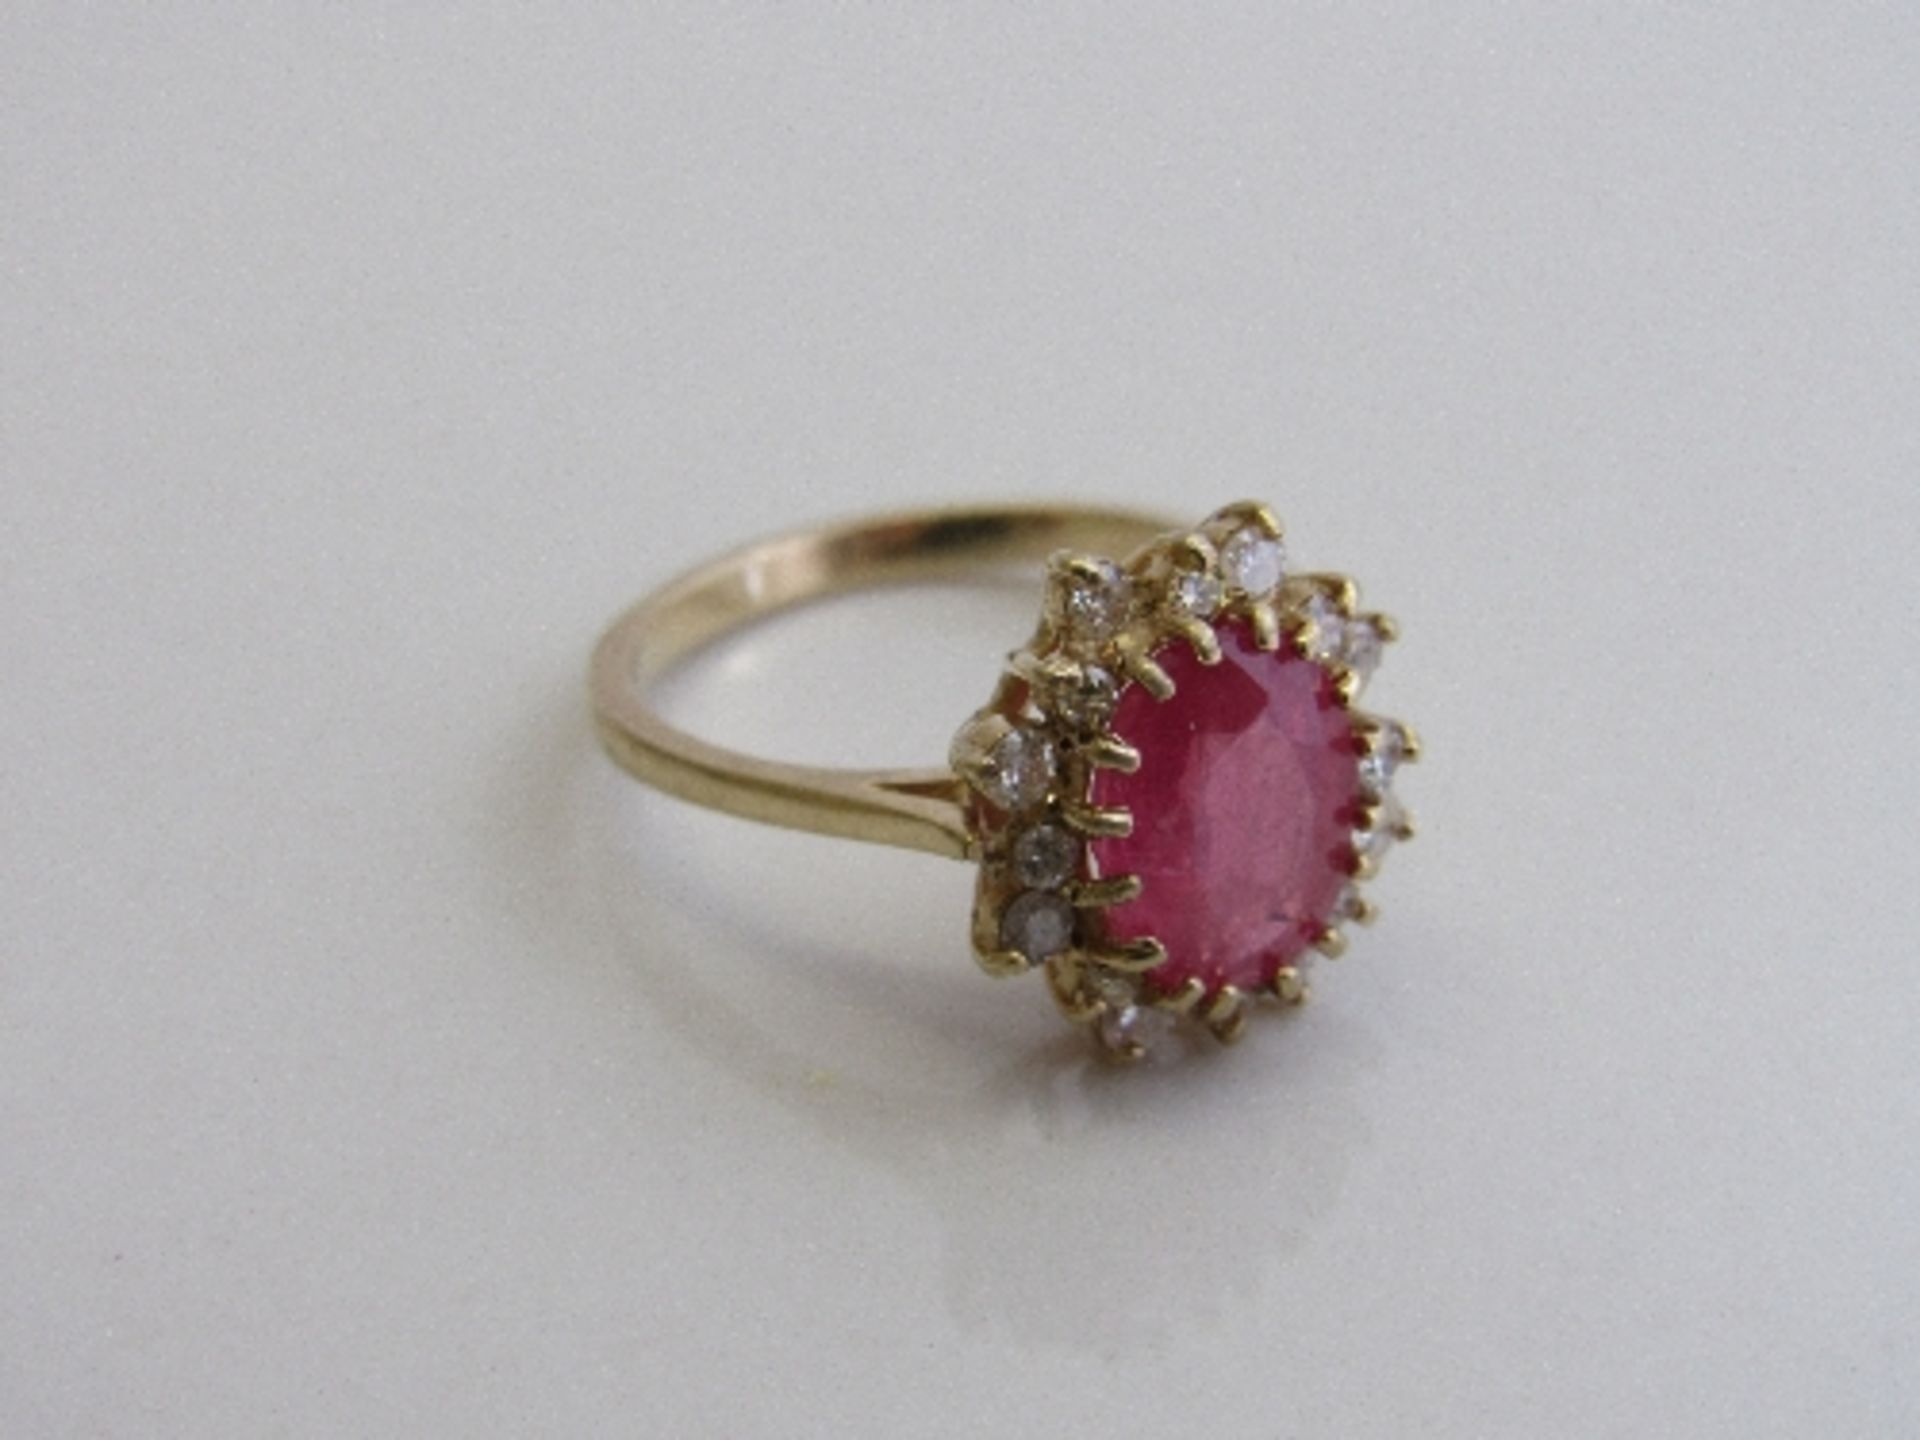 9ct gold, ruby & diamond ring, size Q, weight 3.6gms. Estimate £250-300